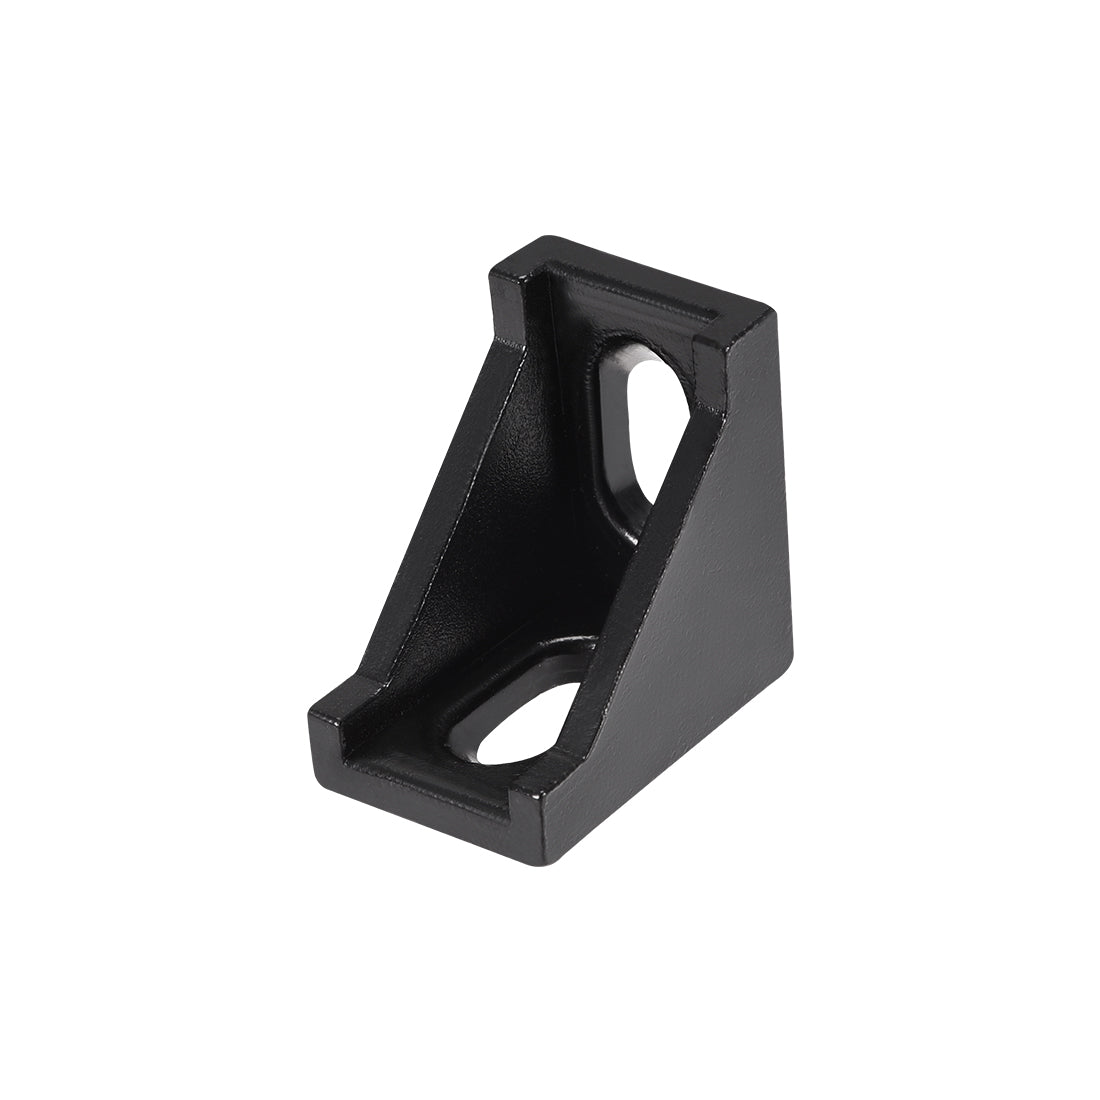 uxcell Uxcell Inside Corner Bracket Gusset, 28mm x 28mm for 2020 Series Aluminum Extrusion Profile with Slot 6mm, 25 Pcs (Black)